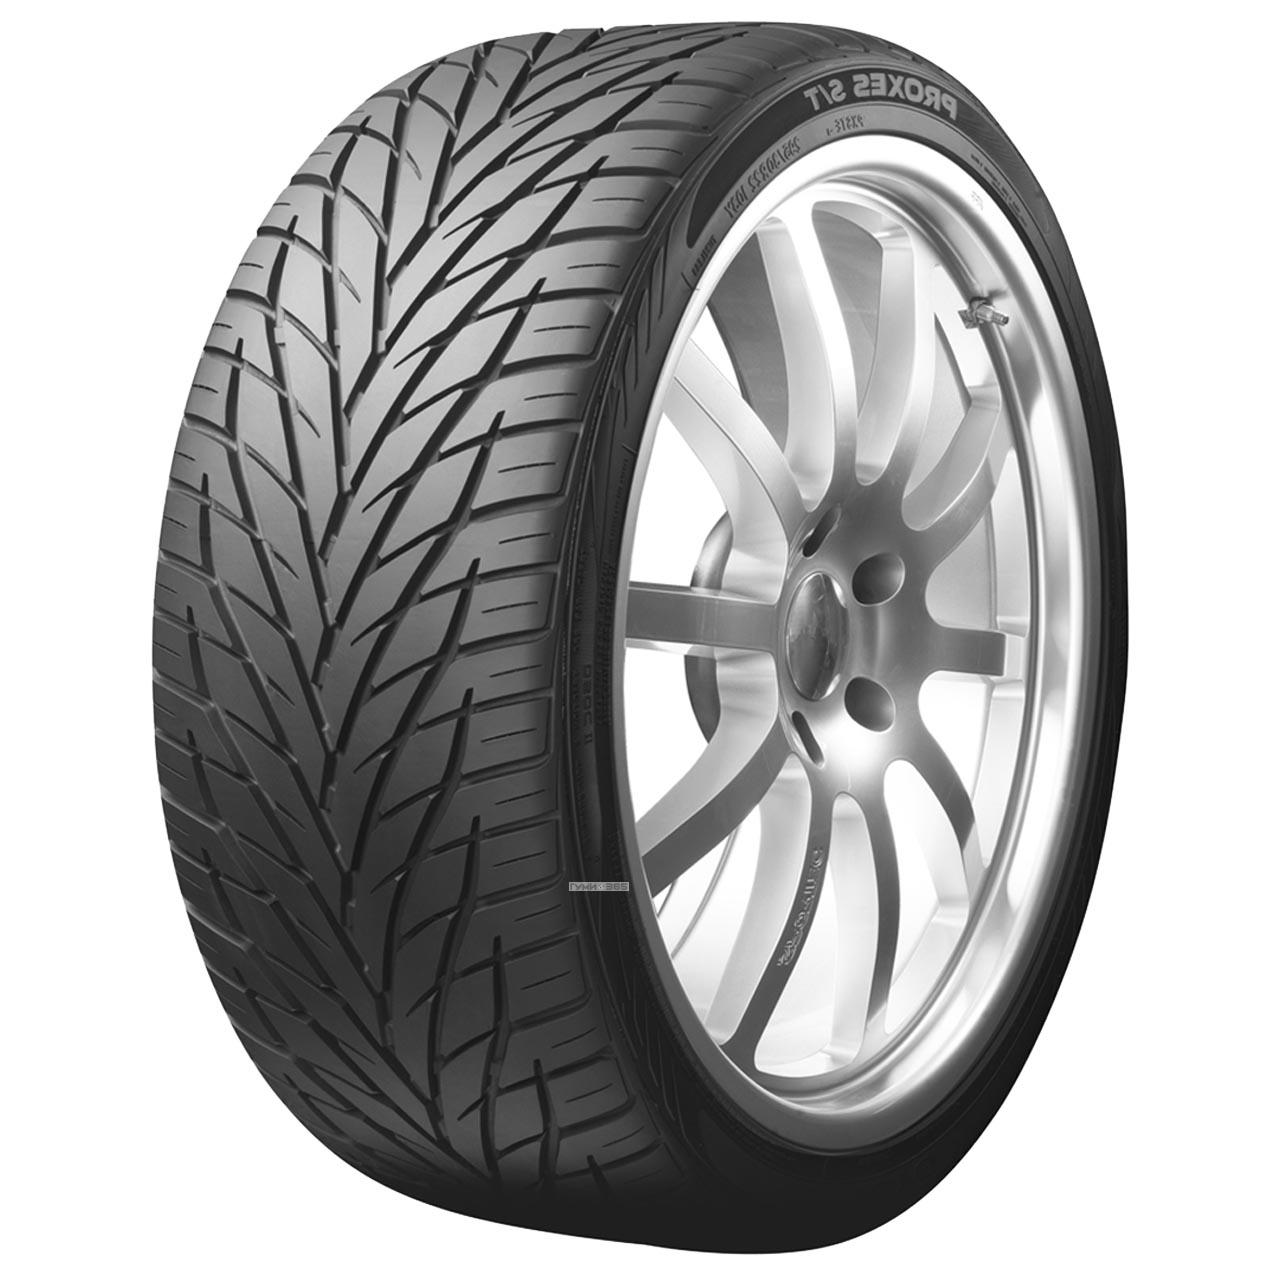 Toyo 275/55R17 109V Proxes S/T TL